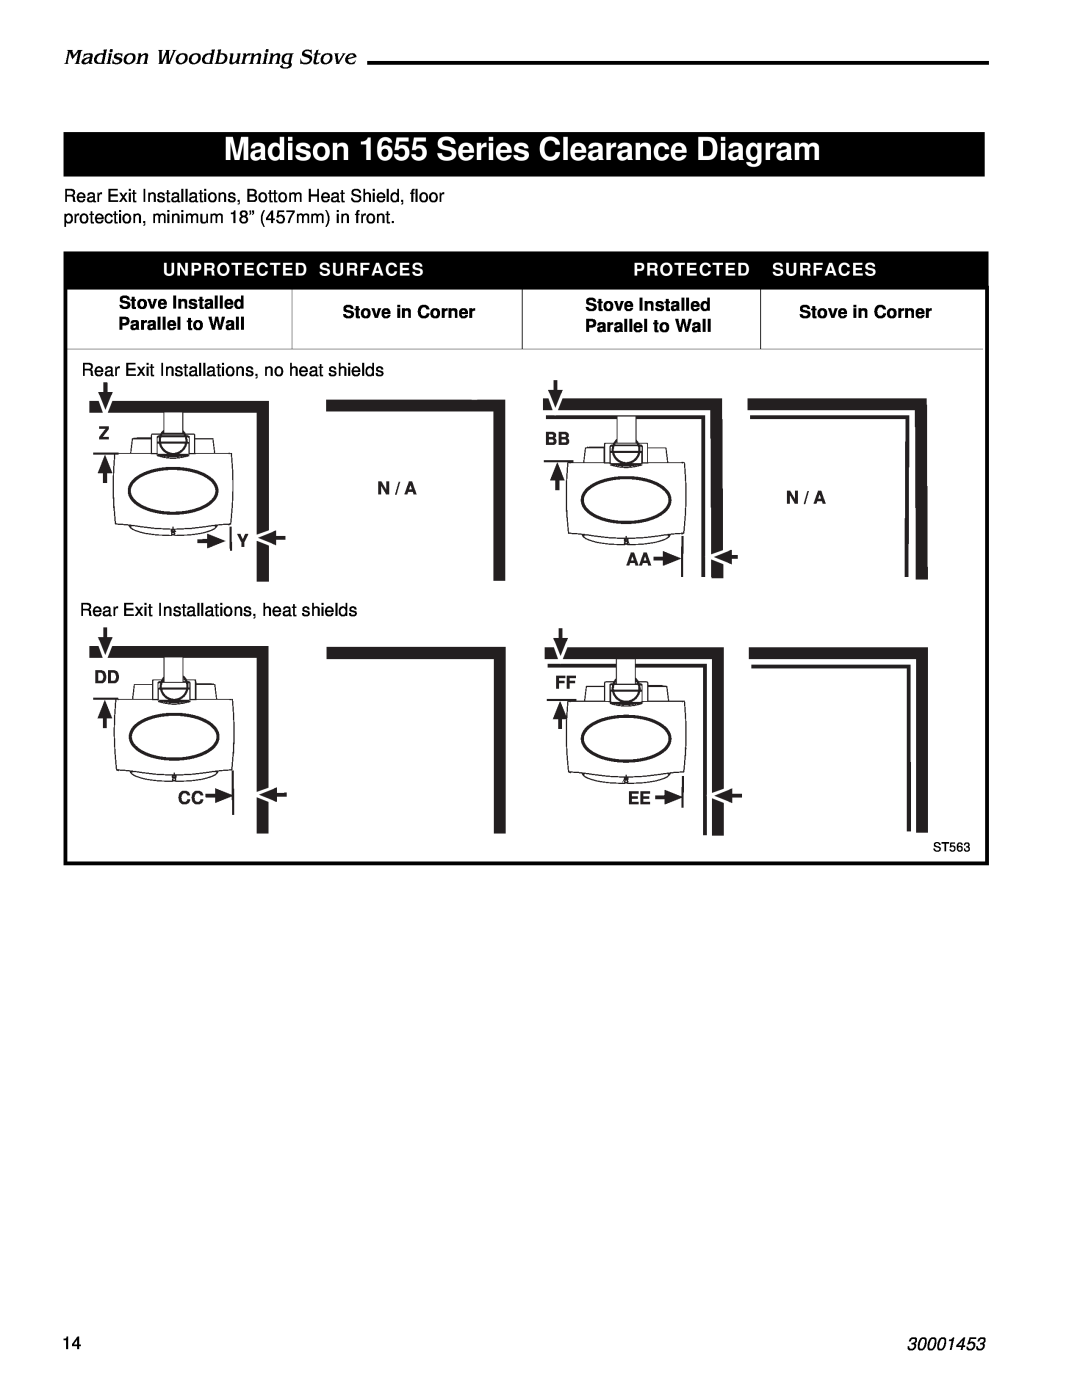 Vermont Casting 410 Madison 1655 Series Clearance Diagram, Madison Woodburning Stove, Unprotected Surfaces, Protected 